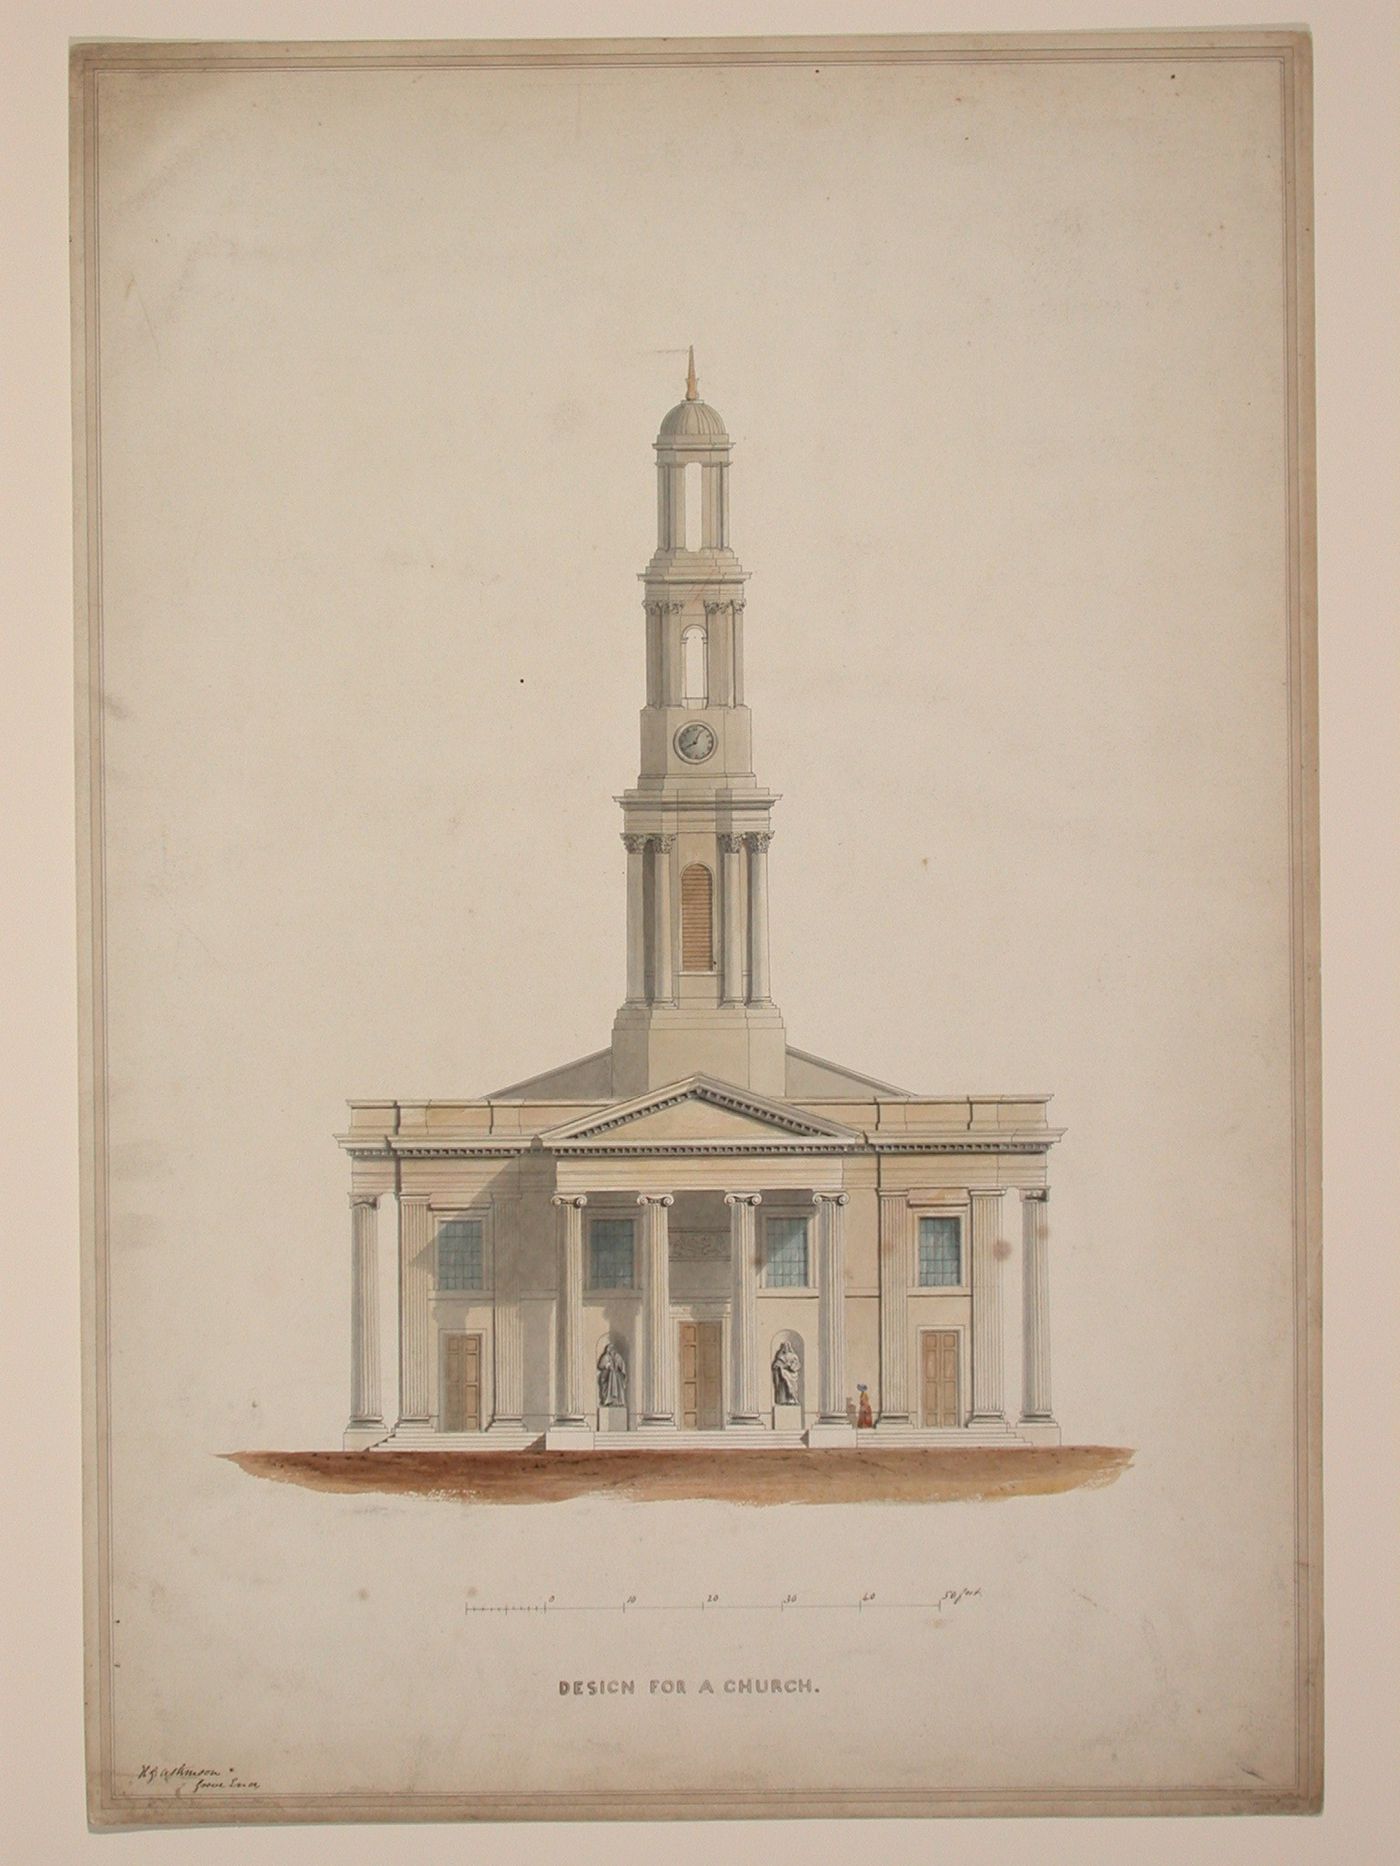 Design for a Church/elevation